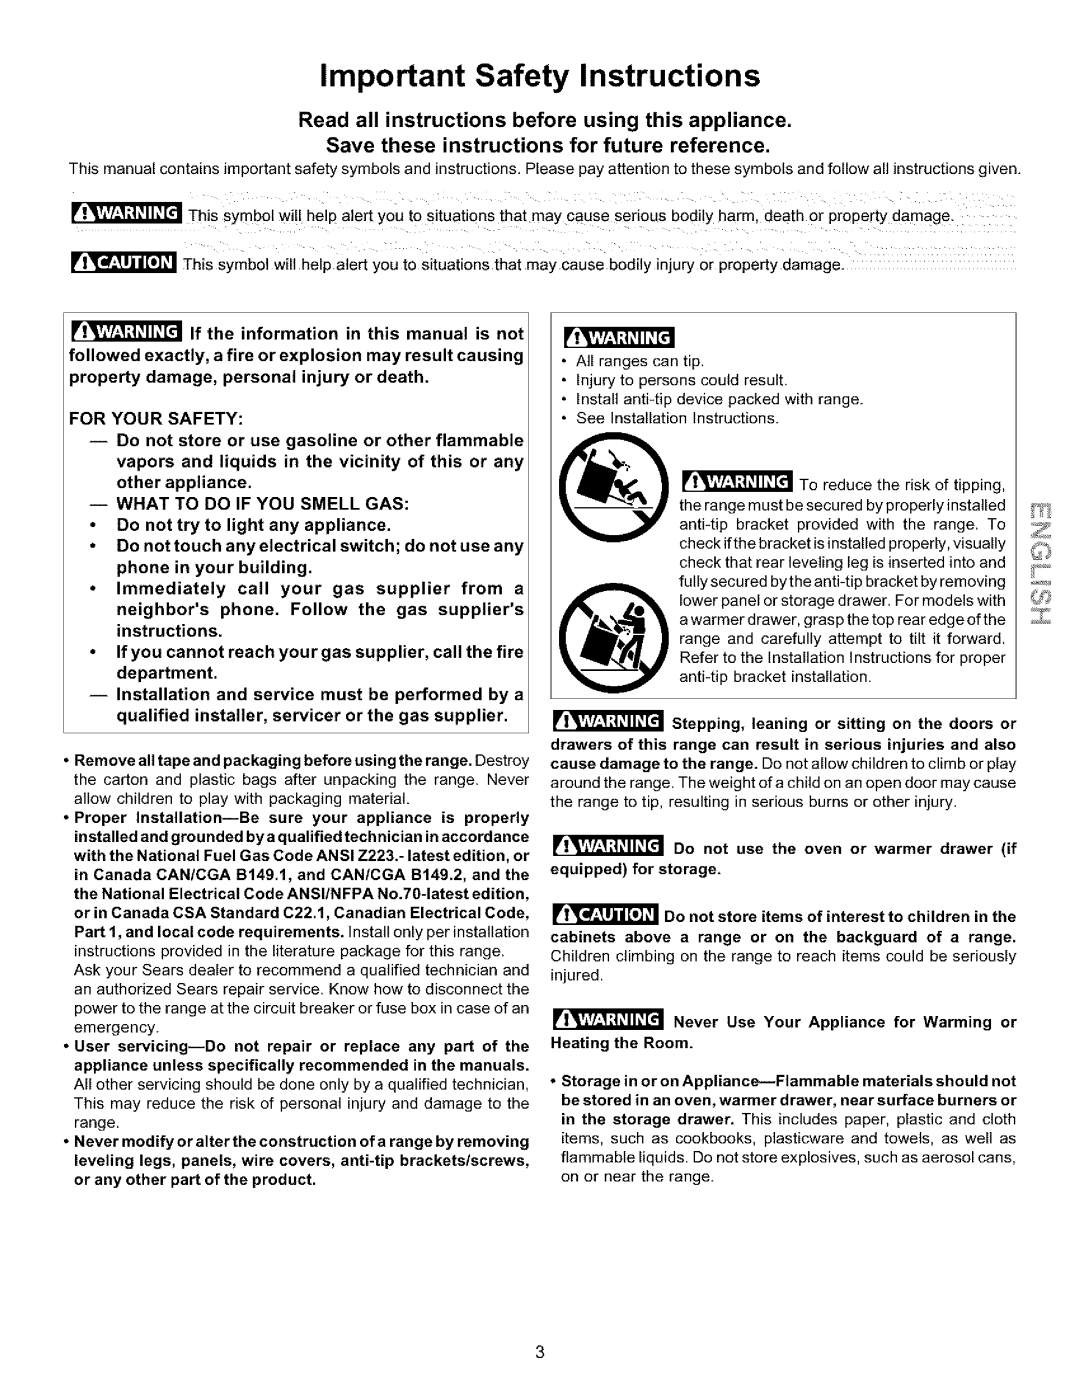 Kenmore 790.75604 manual Important Safety Instructions, Read all instructions before using this appliance, For Your Safety 